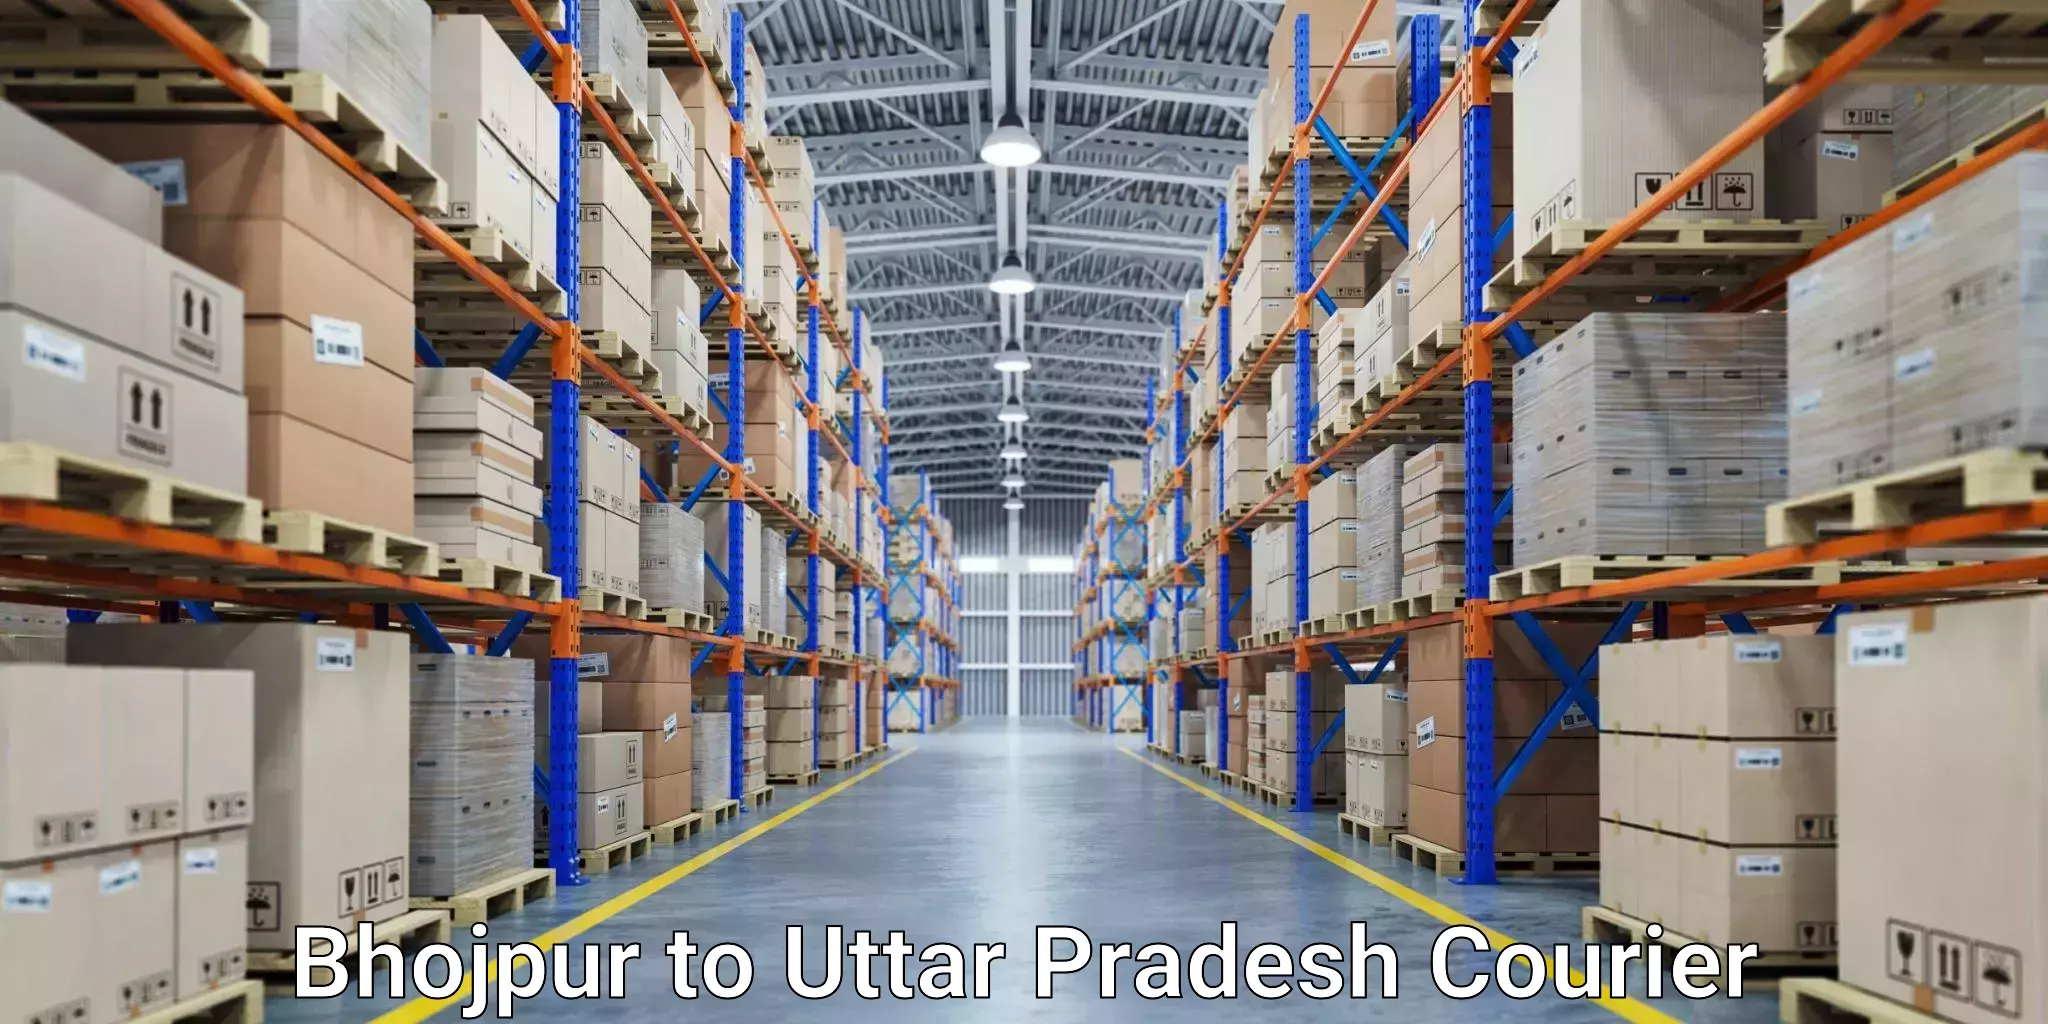 Courier service partnerships Bhojpur to Jalesar